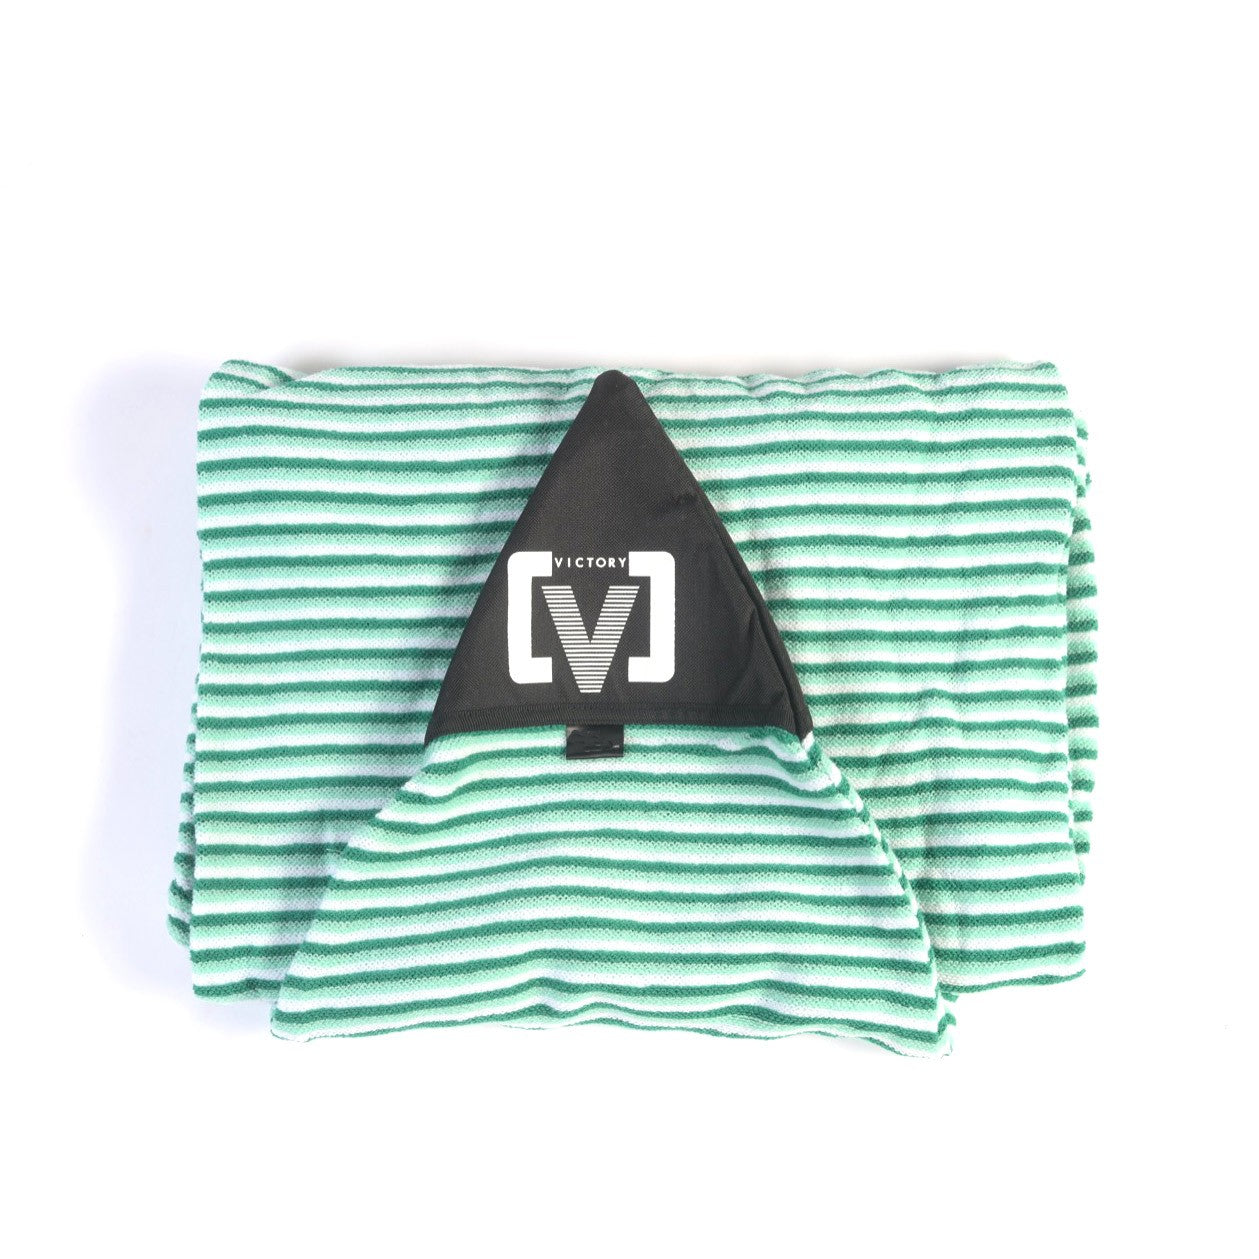 VICTORY - Surf Sock Cover - Shortboard - 6'0 - Green / White